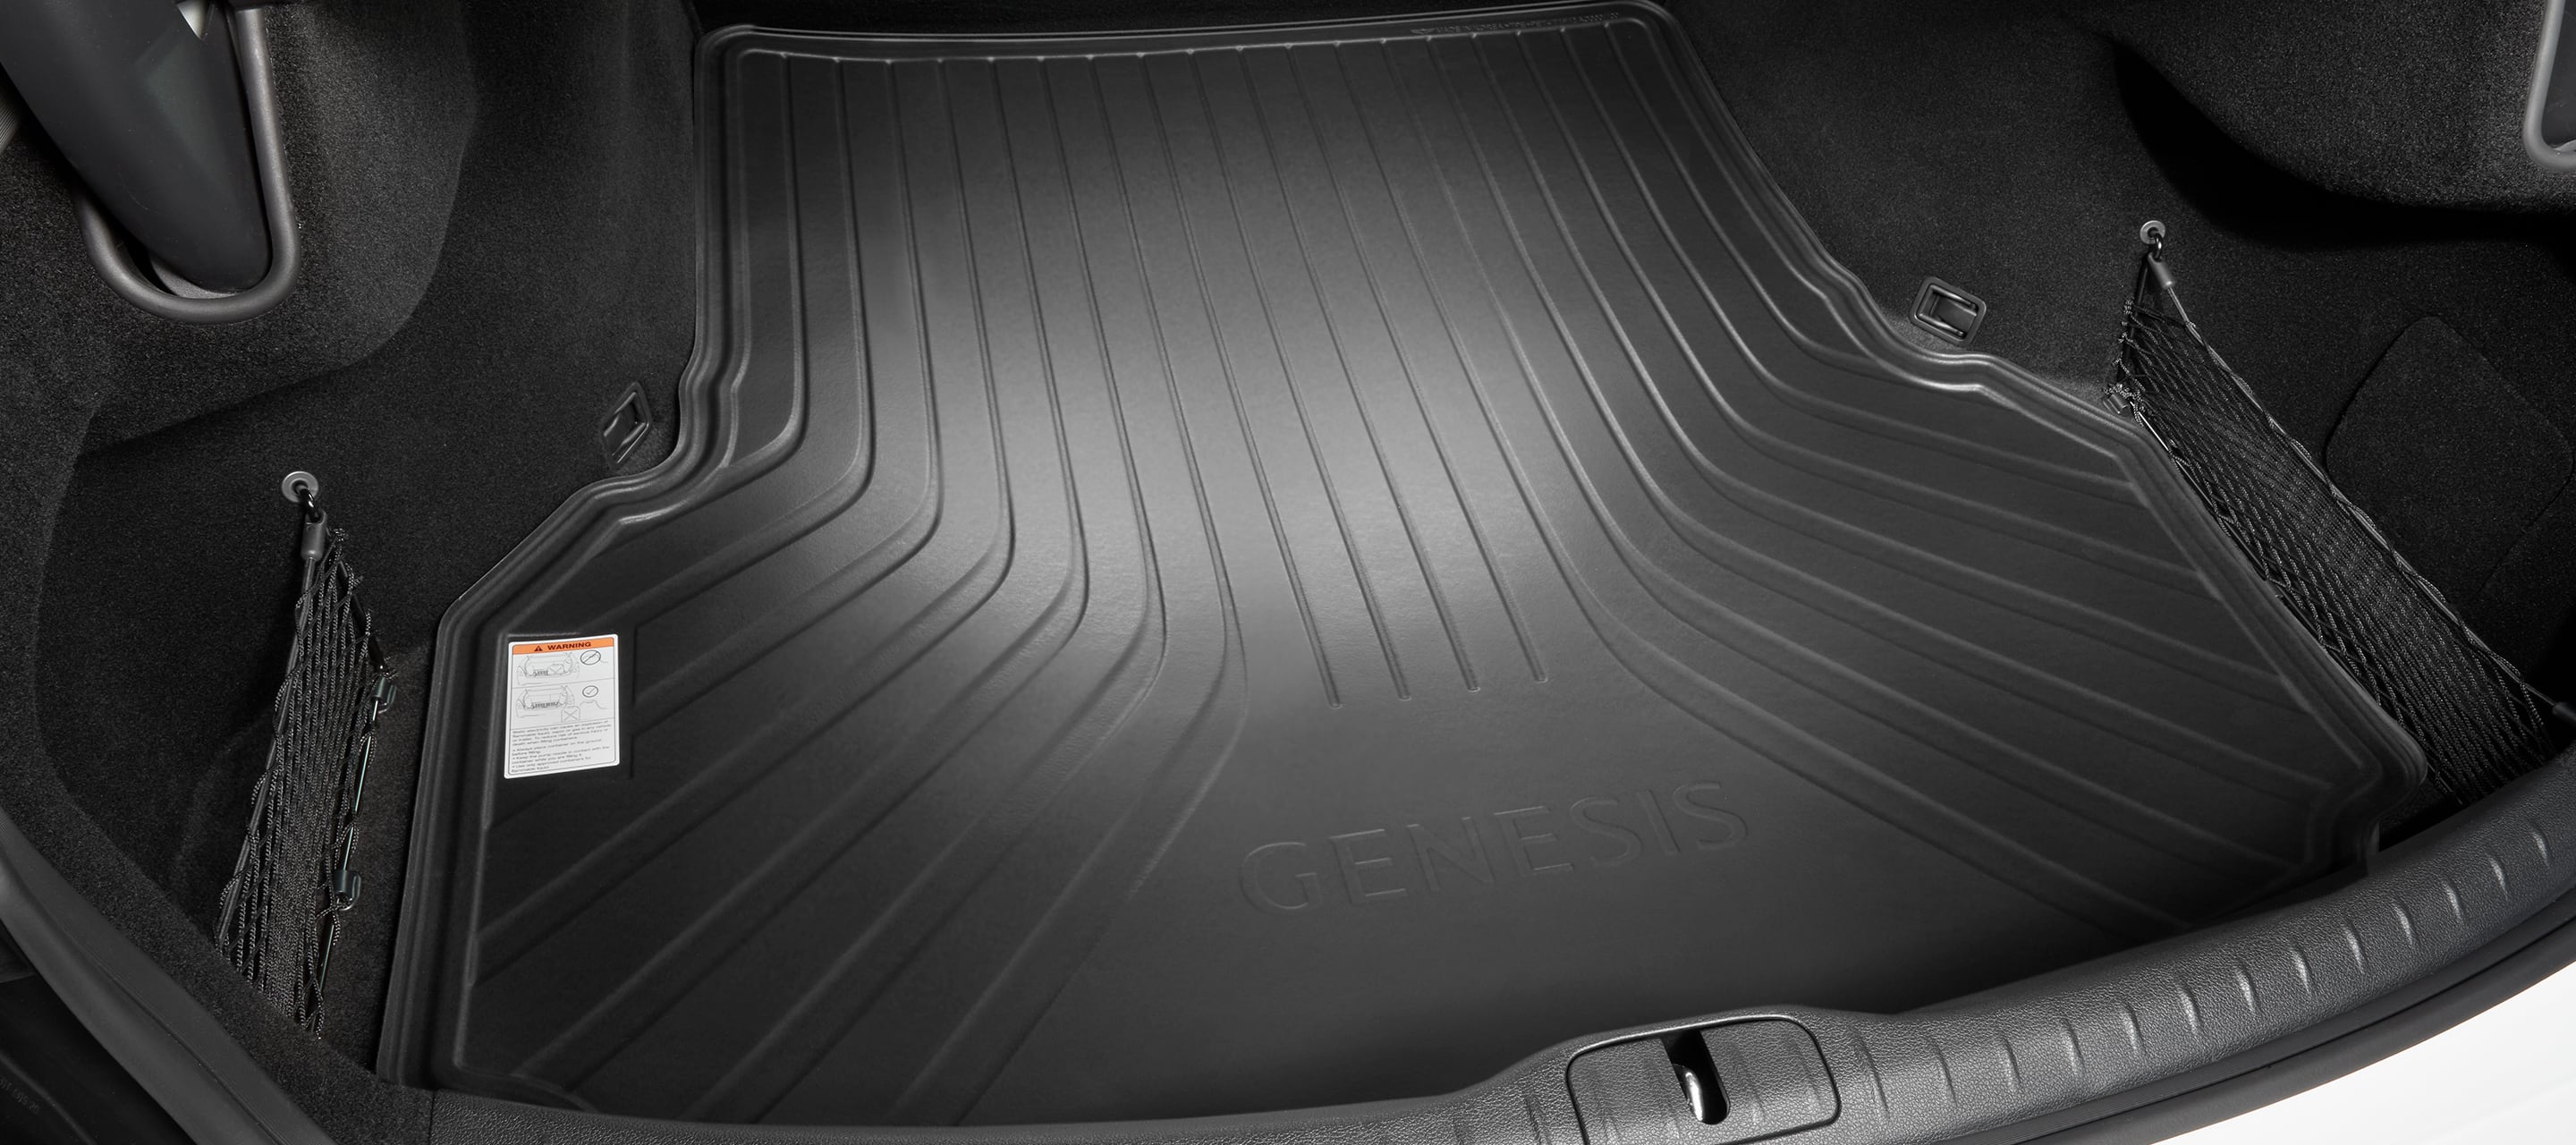 Cargo tray accessory for the 2022 Genesis G80.